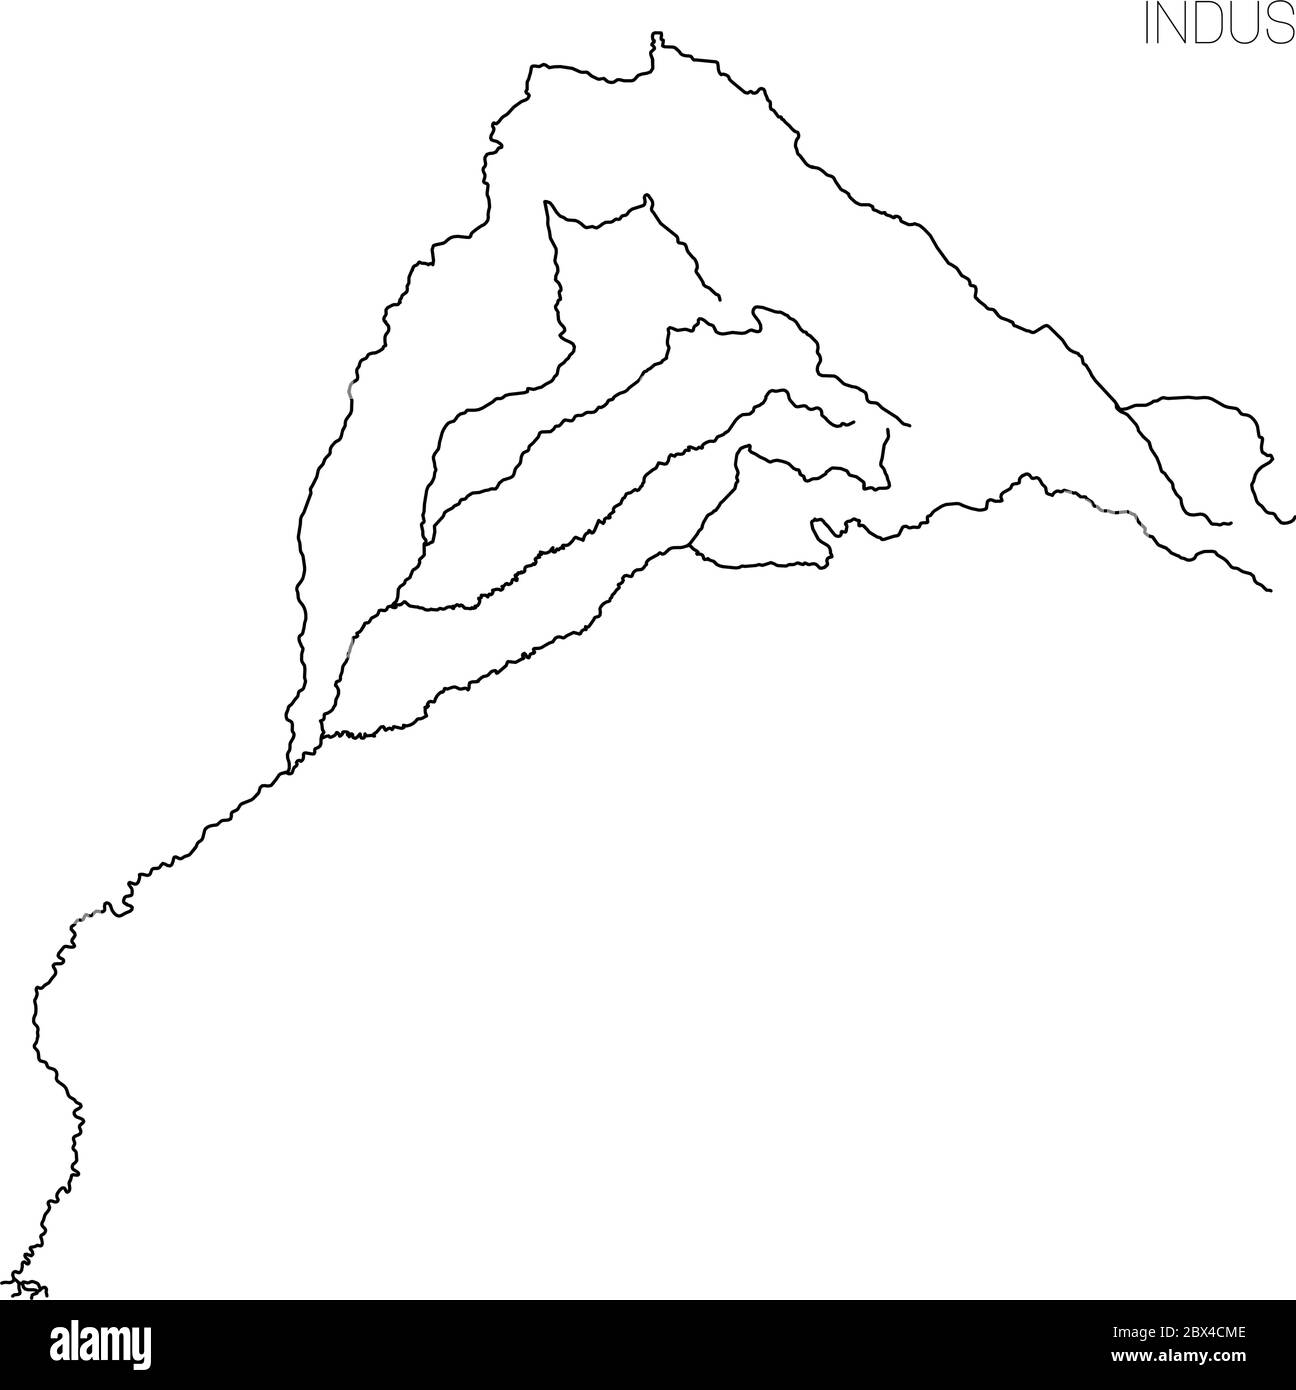 Map Of Indus River Drainage Basin Simple Thin Outline Vector Illustration 2BX4CME 